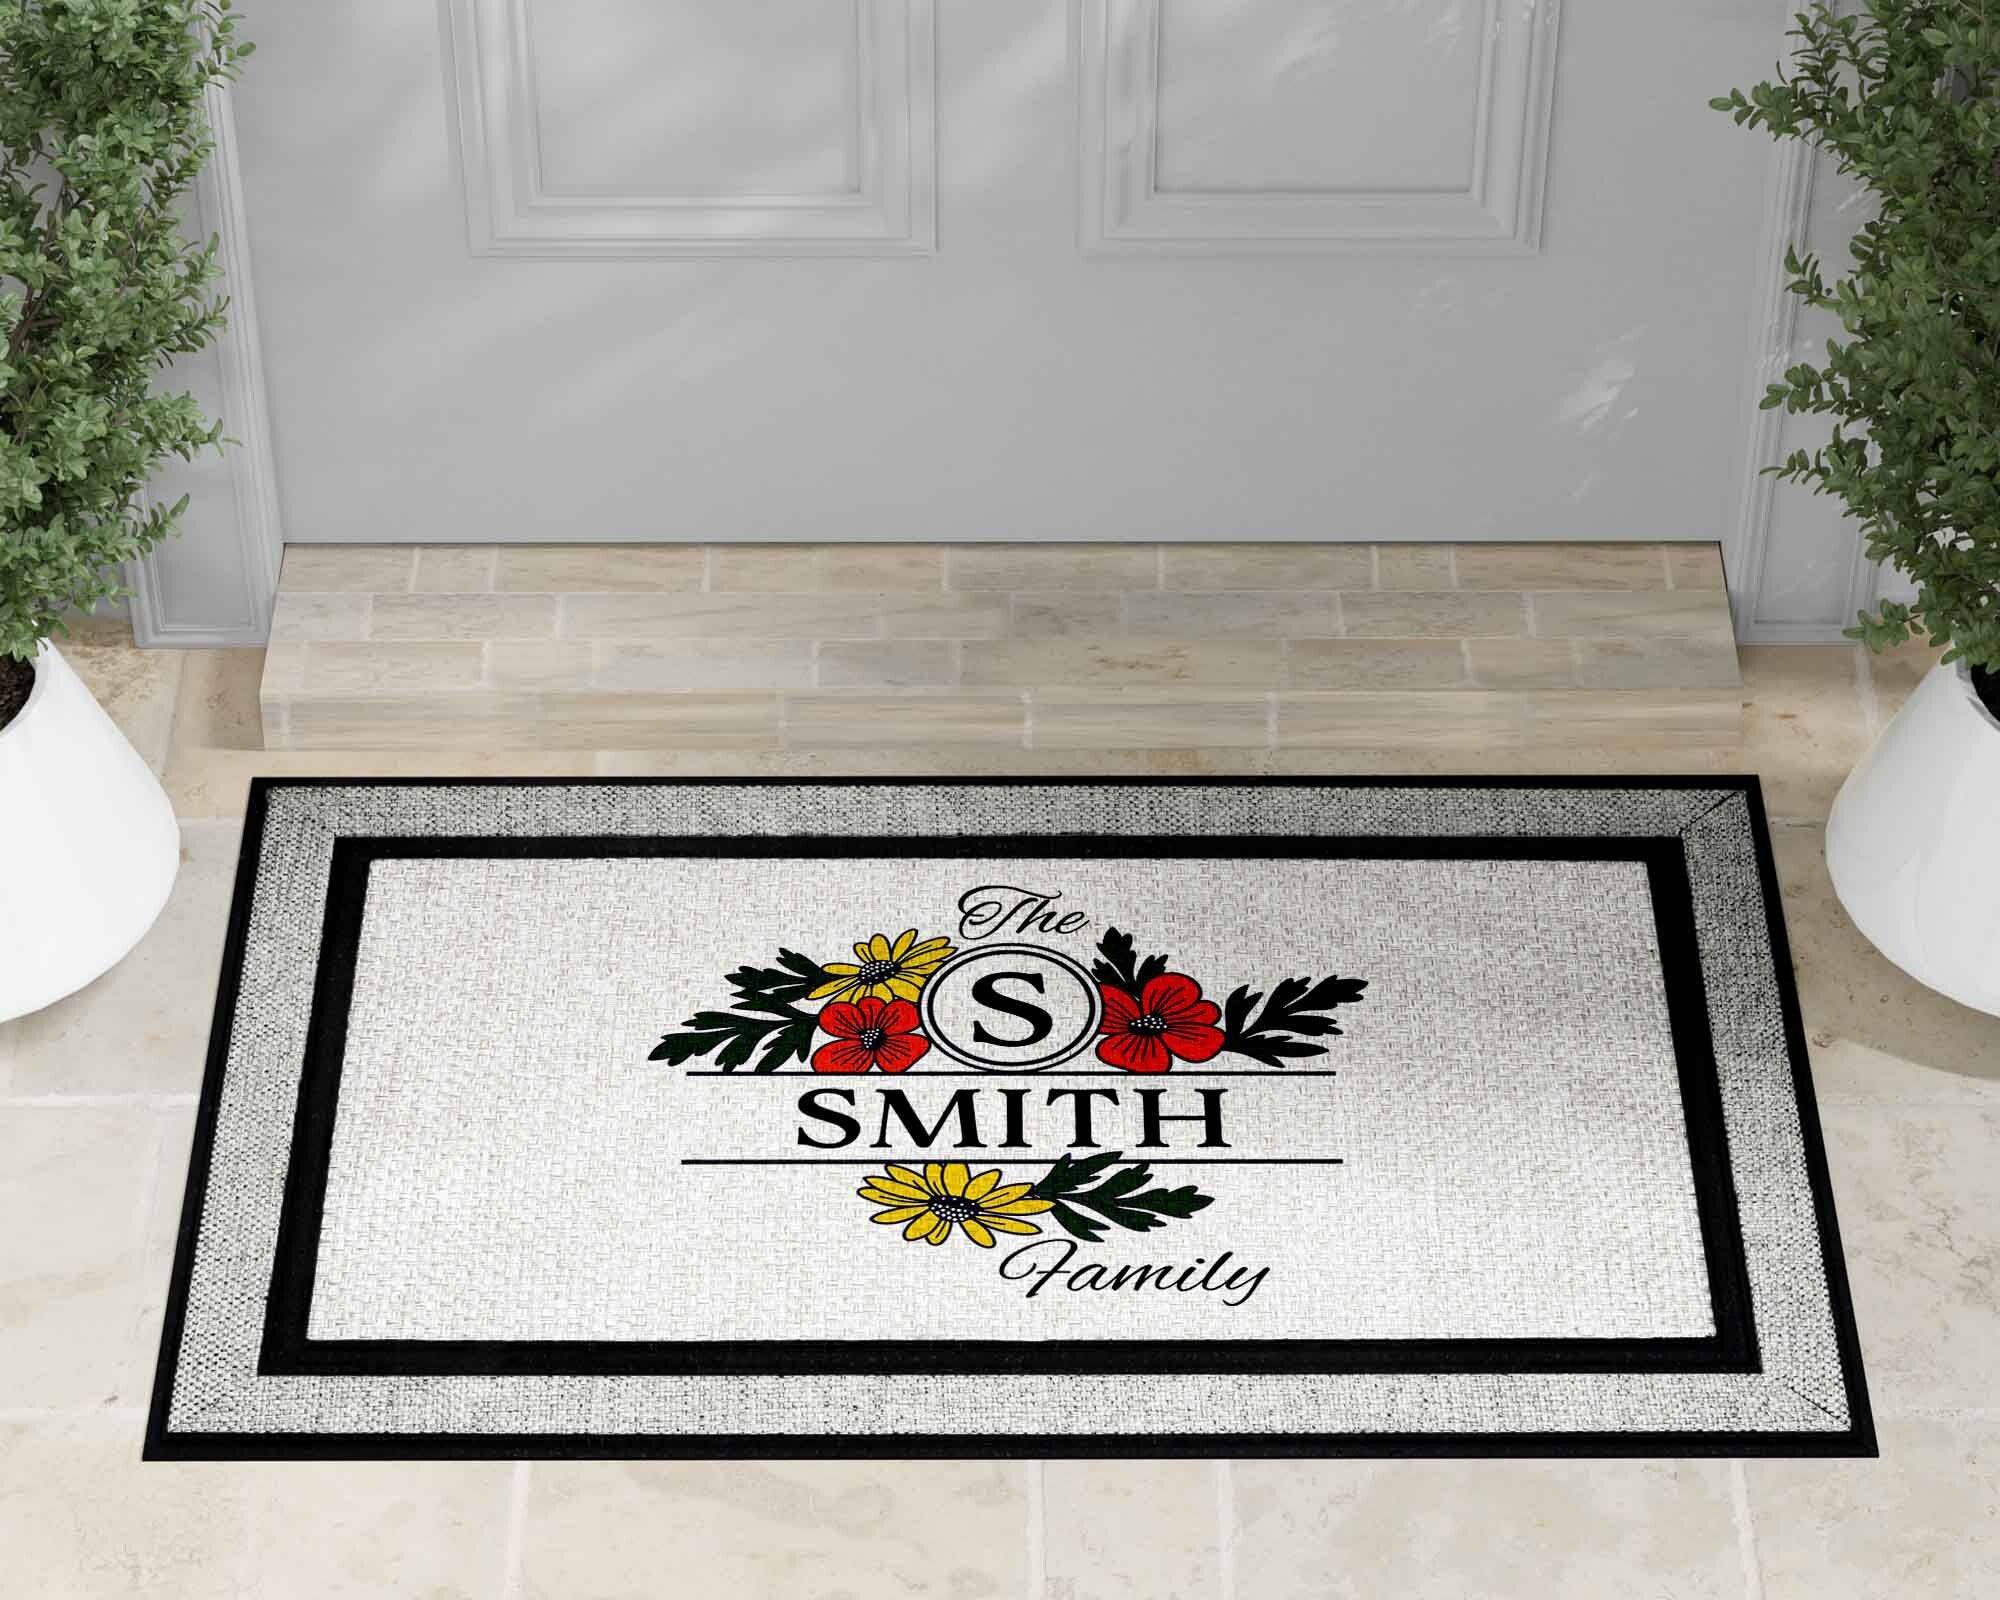 Script Custom Large Door Mat W/ Personalized Name Initial, Large Outdoor  Welcome Doormat, Realtor Gift, XL Color Black Grey White Navy Rug 